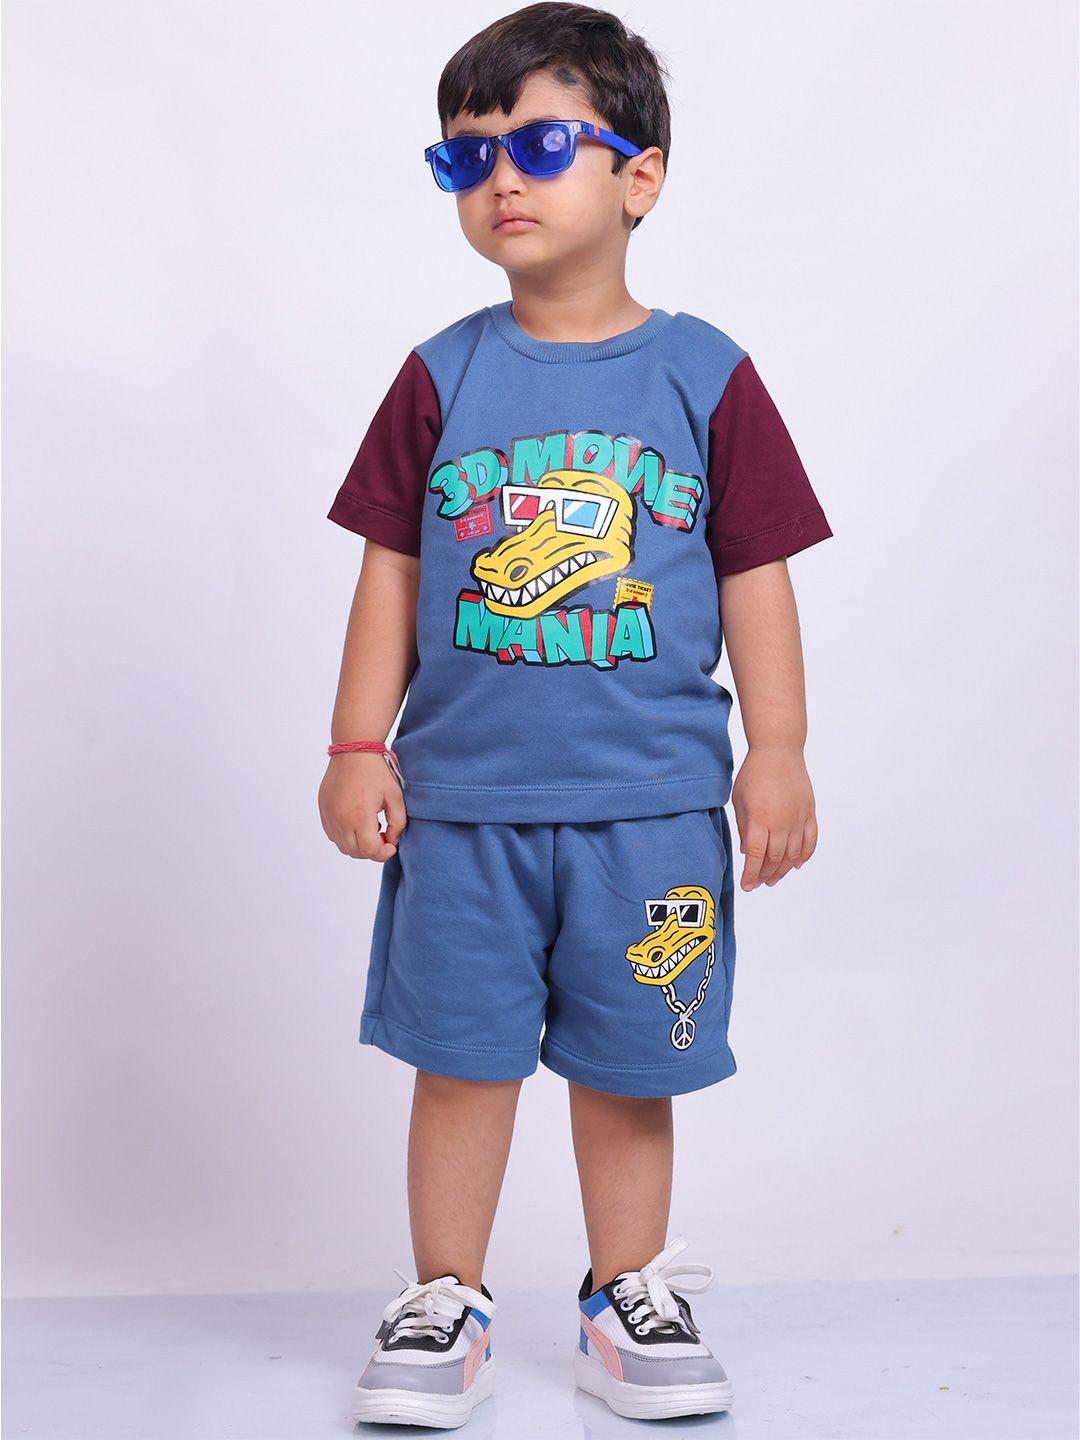 Little Carrot Boys Teal & Yellow Printed T-shirt with Shorts